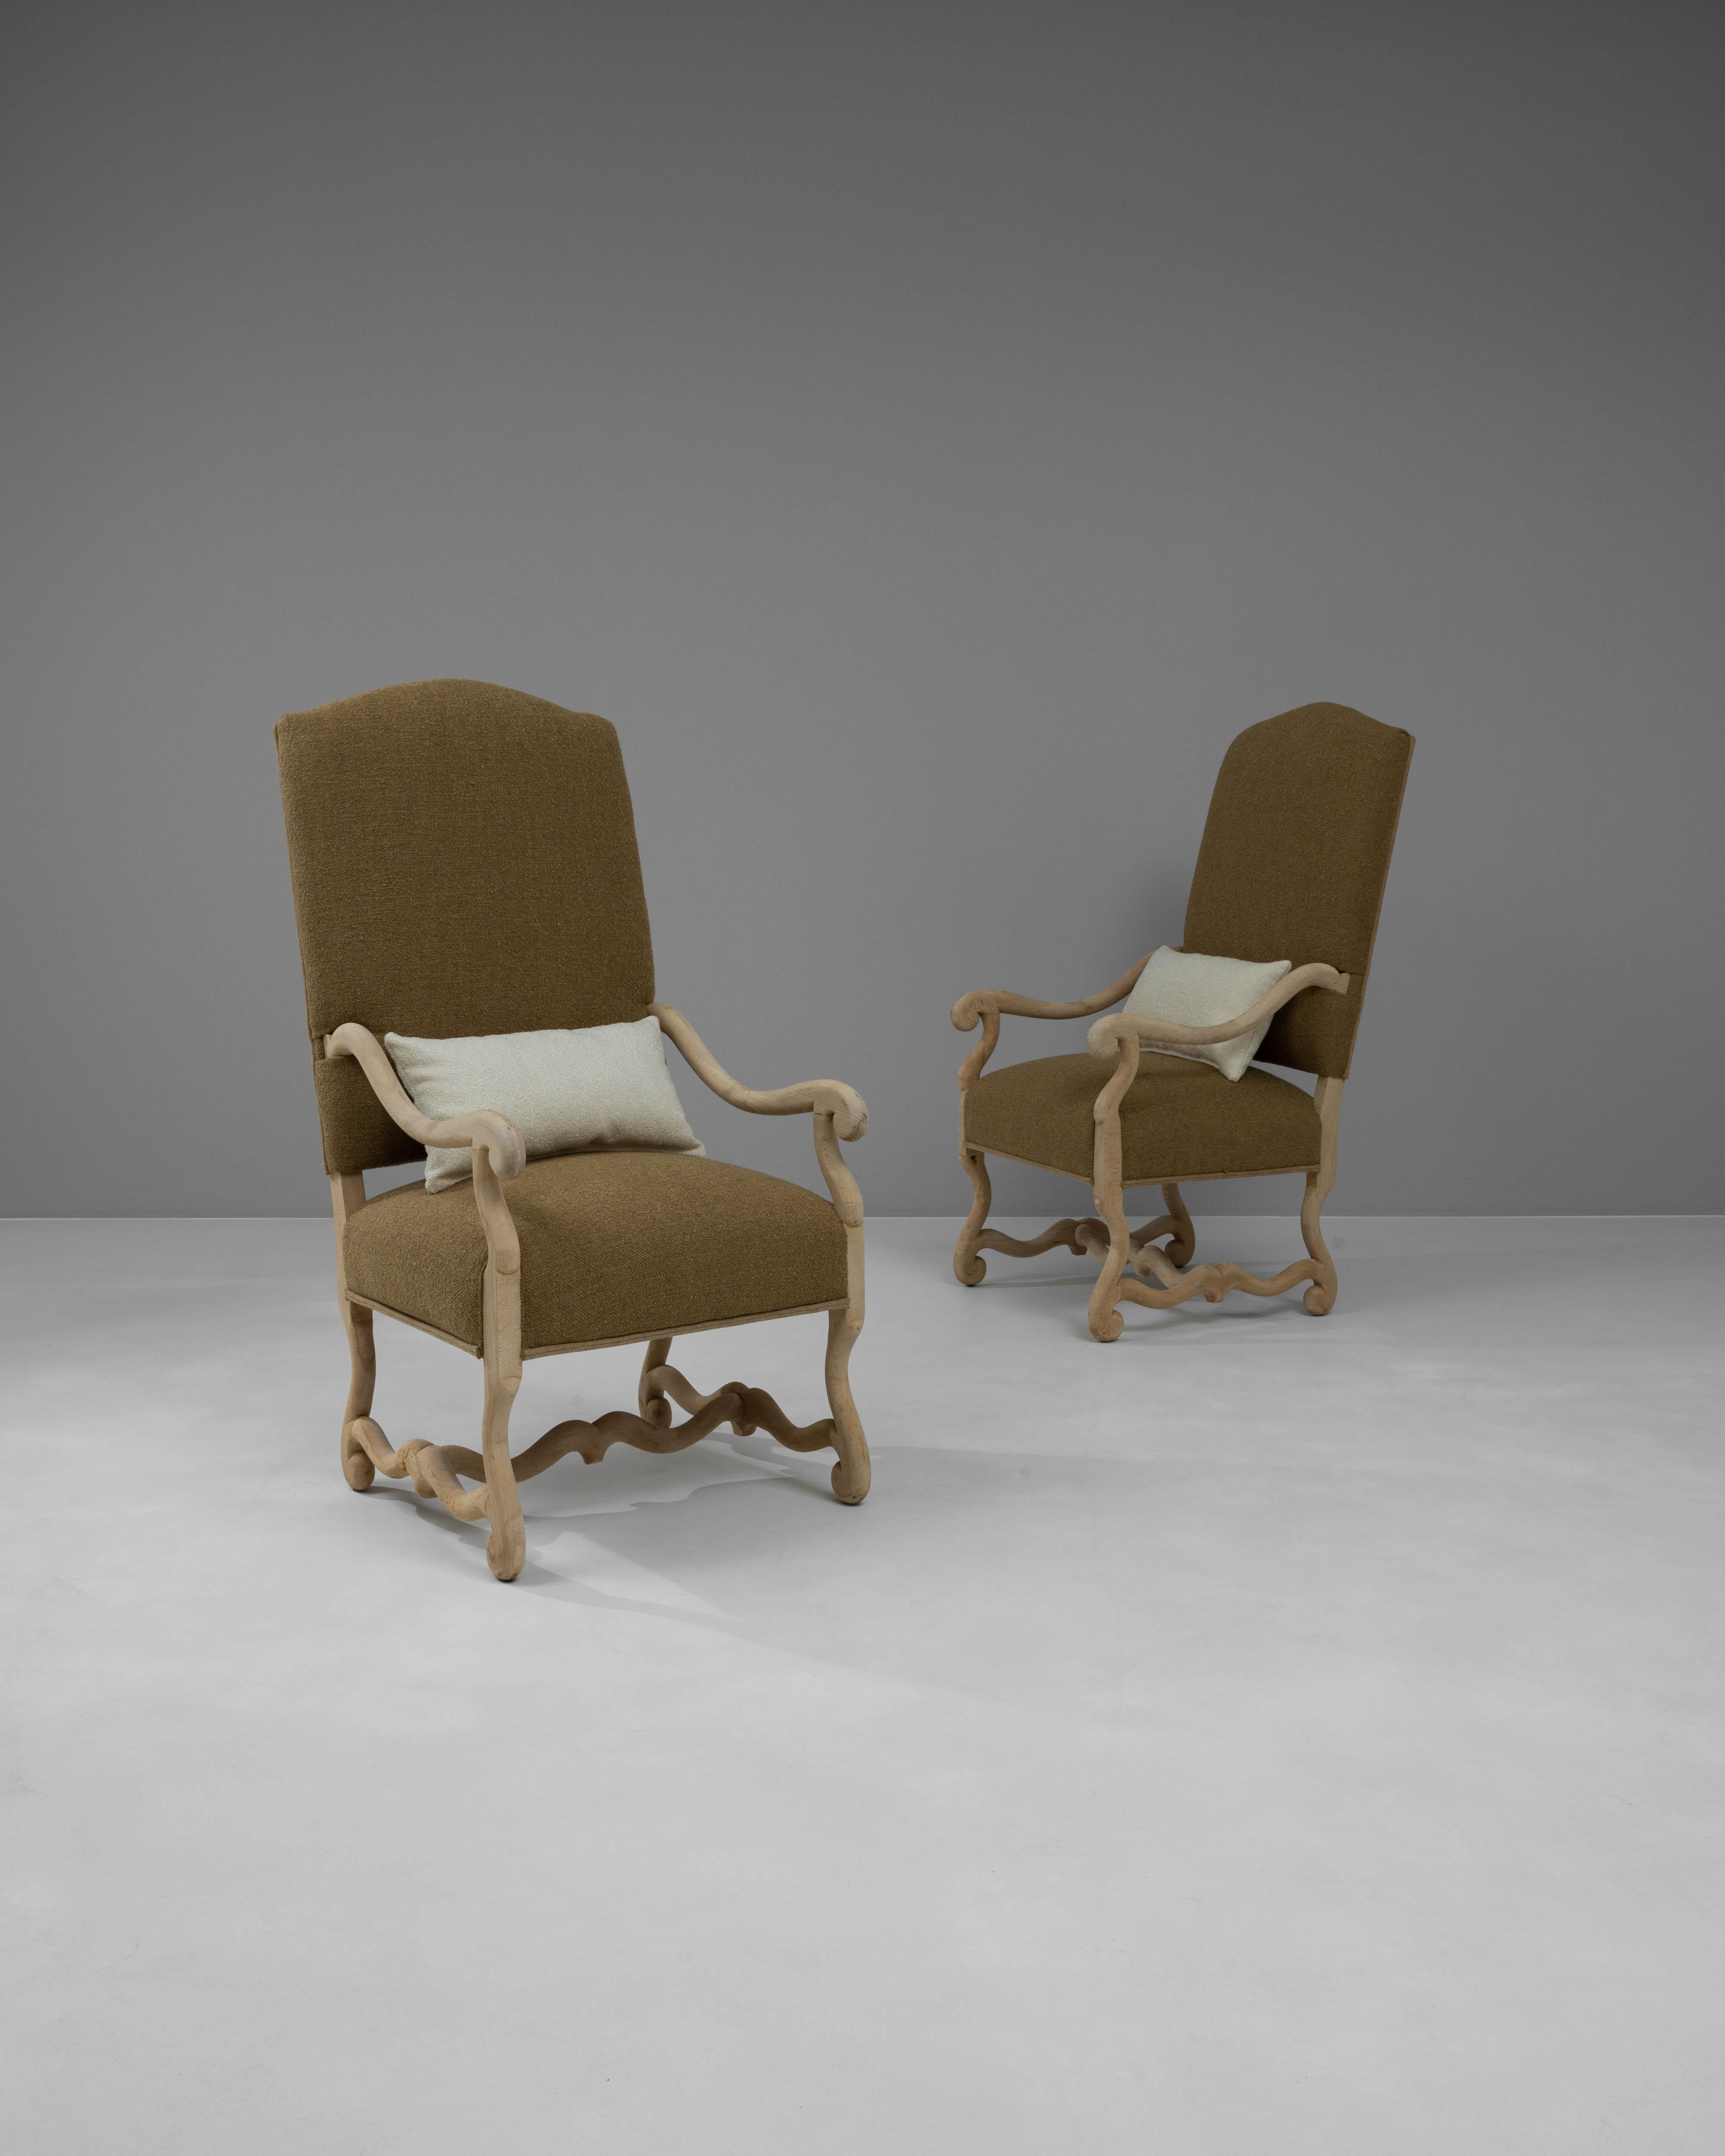 Elevate your living space with this exquisite pair of 20th Century Belgian armchairs, each crafted from bleached oak and meticulously upholstered in a rich, brown fabric. The chairs feature elegant, flowing lines and detailed carvings on the arms